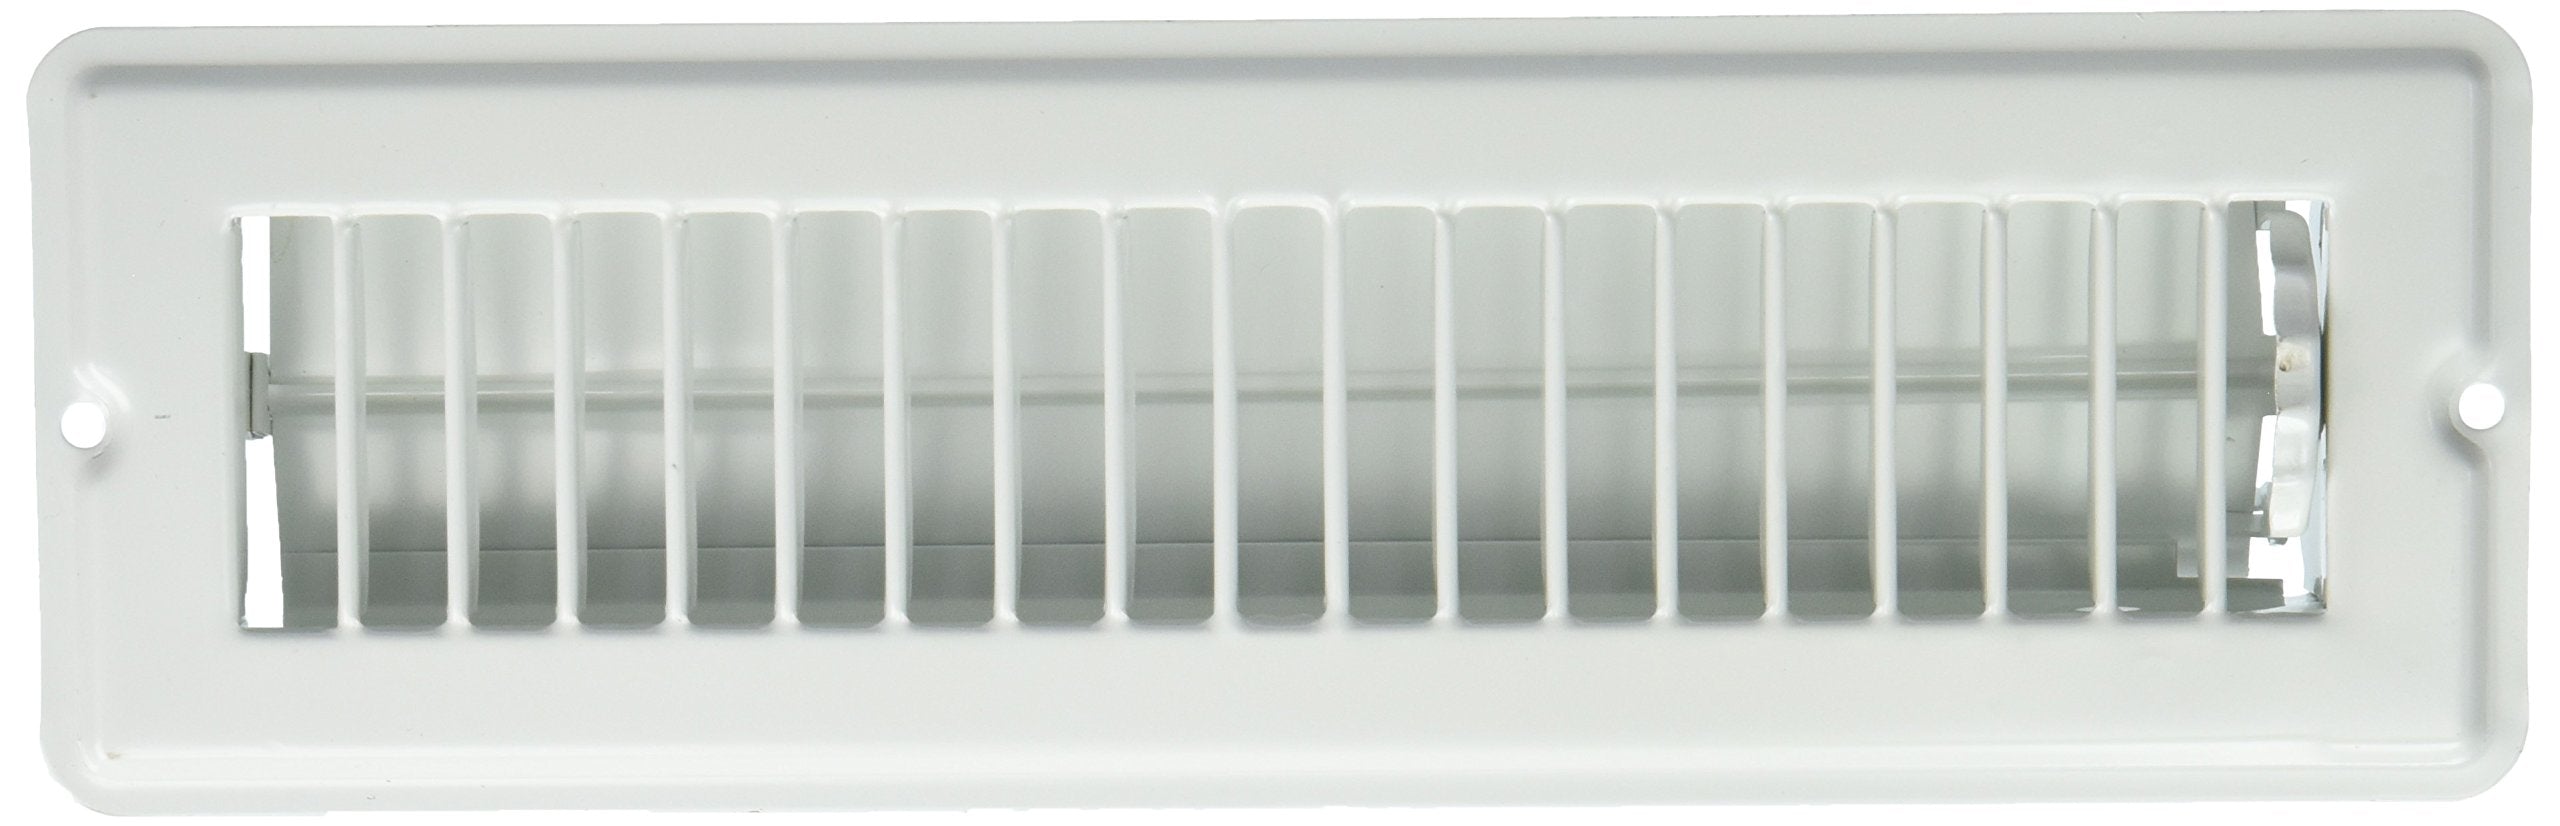 AP Products 013-640 White 2-1/4 inch x 10 inch Floor Register with Damper